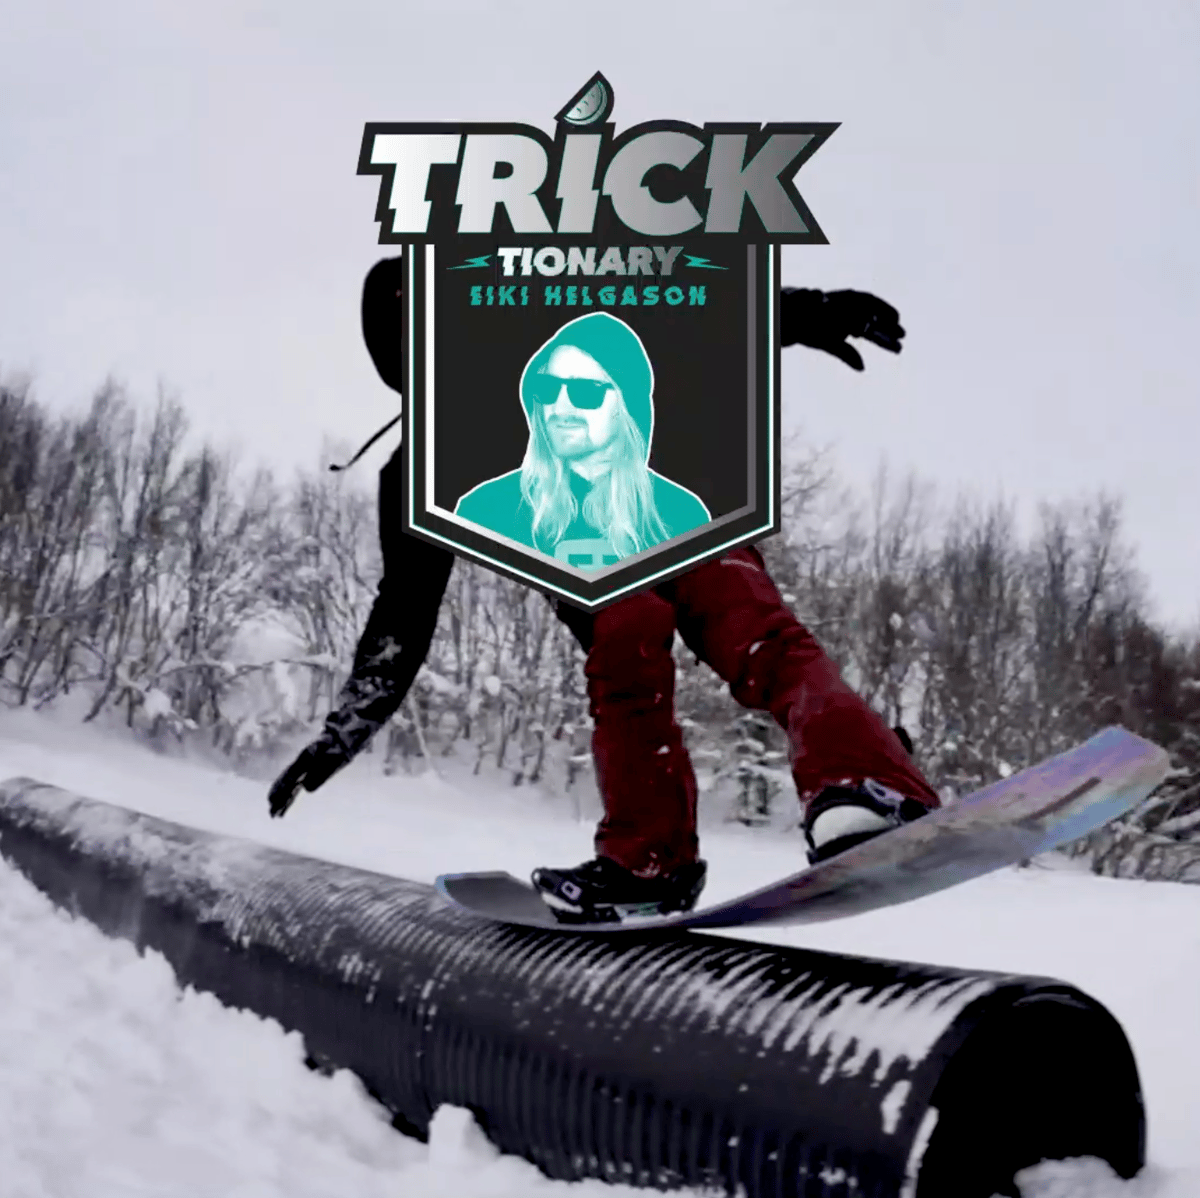 Tricktionary is here – WIN prizes for trying tricks!